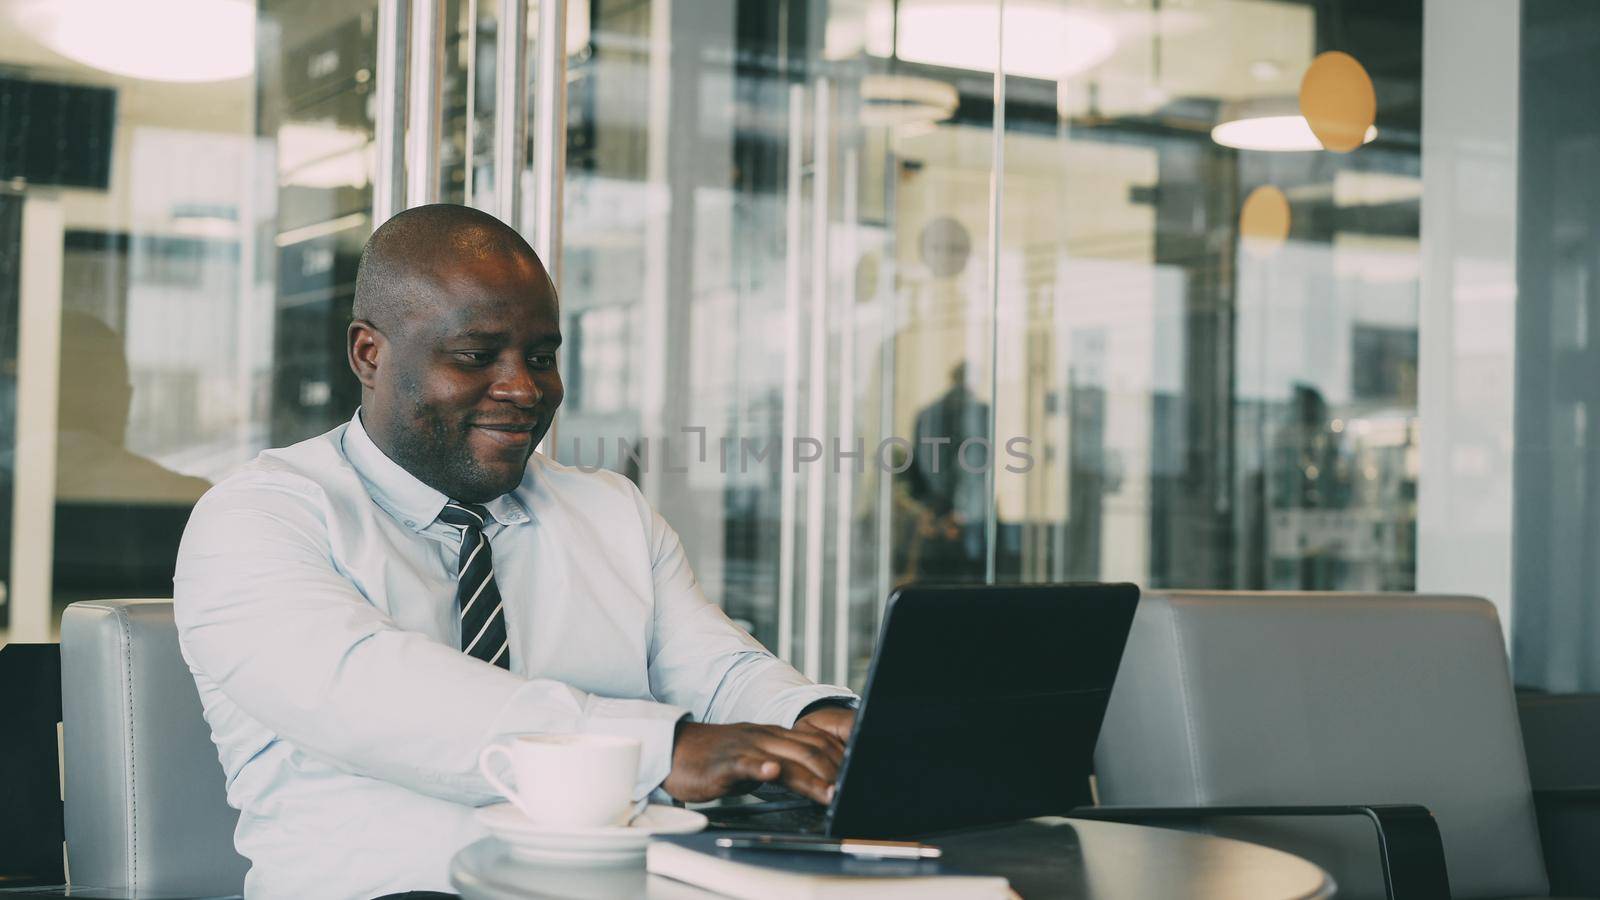 Cheery African American businessman smiling, printing and working on his laptop in glassy cafe during lunch break. by silverkblack